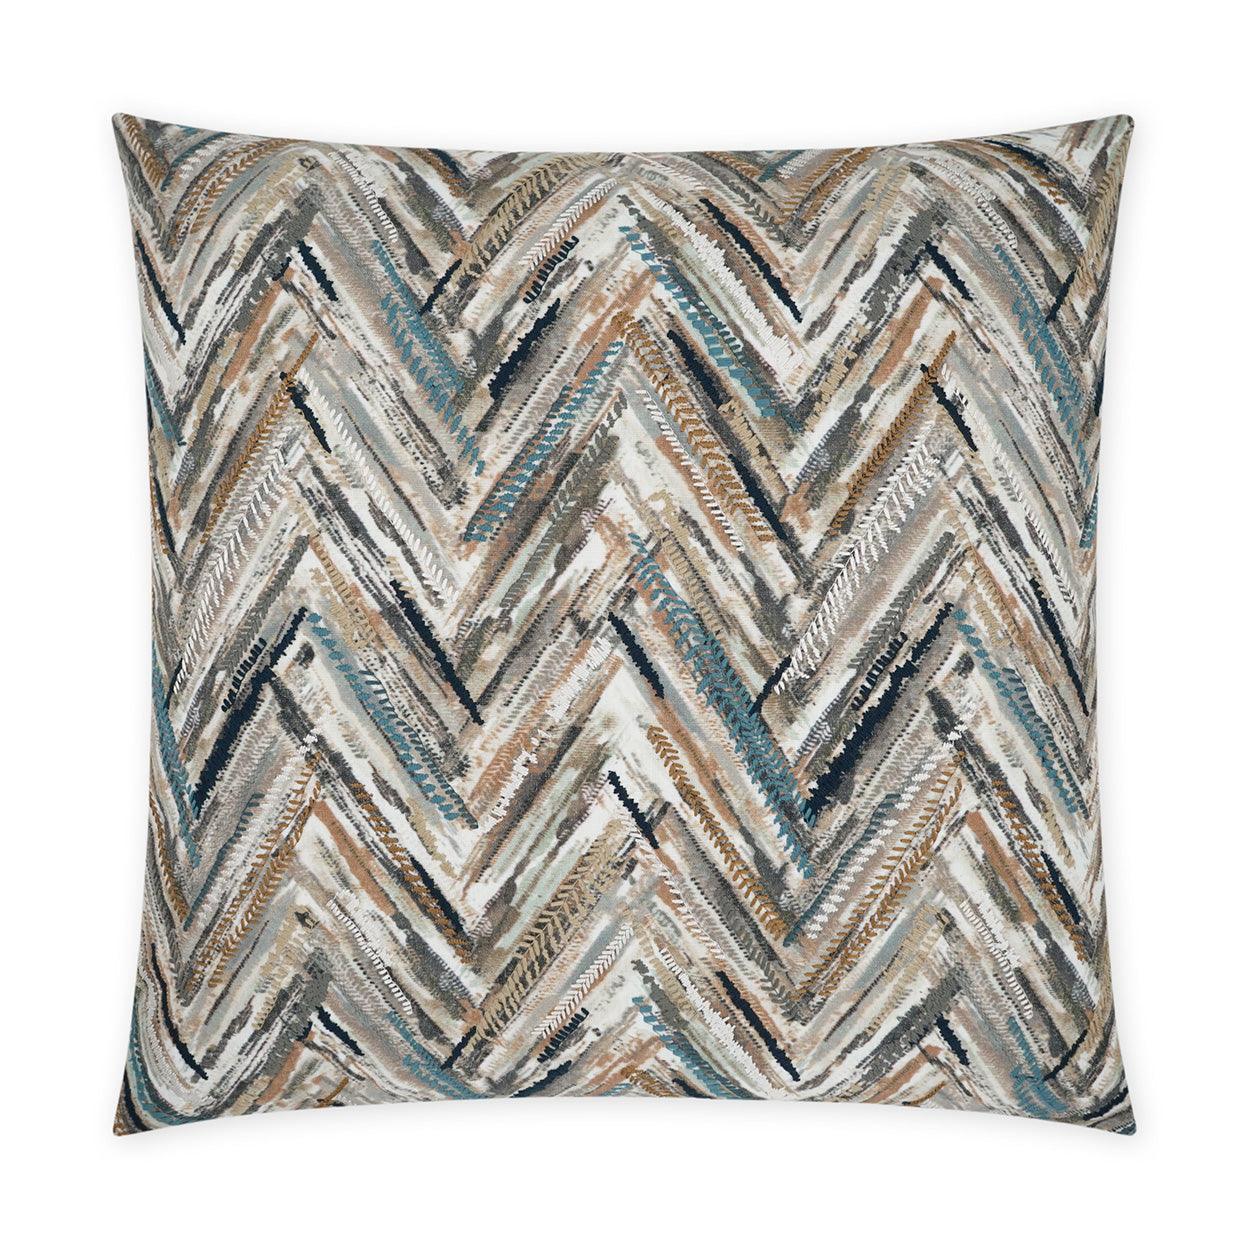 Attribute Abstract Chevon Embroidery Large Throw Pillow With Insert - Uptown Sebastian